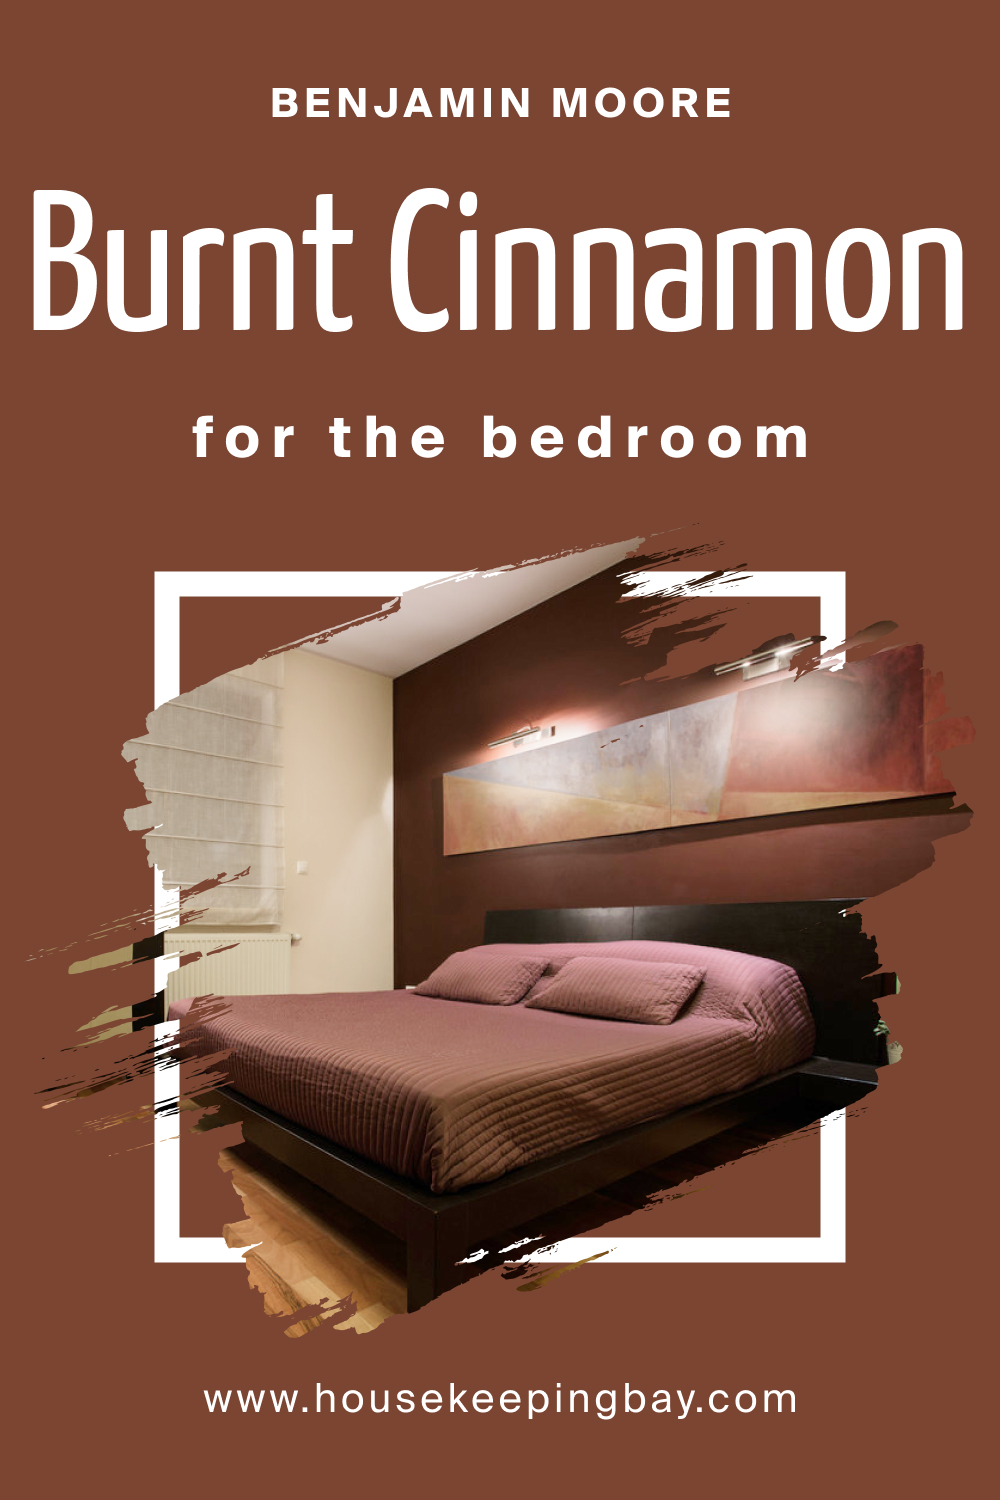 How to Use BM Burnt Cinnamon 2094-10 in the Bedroom?